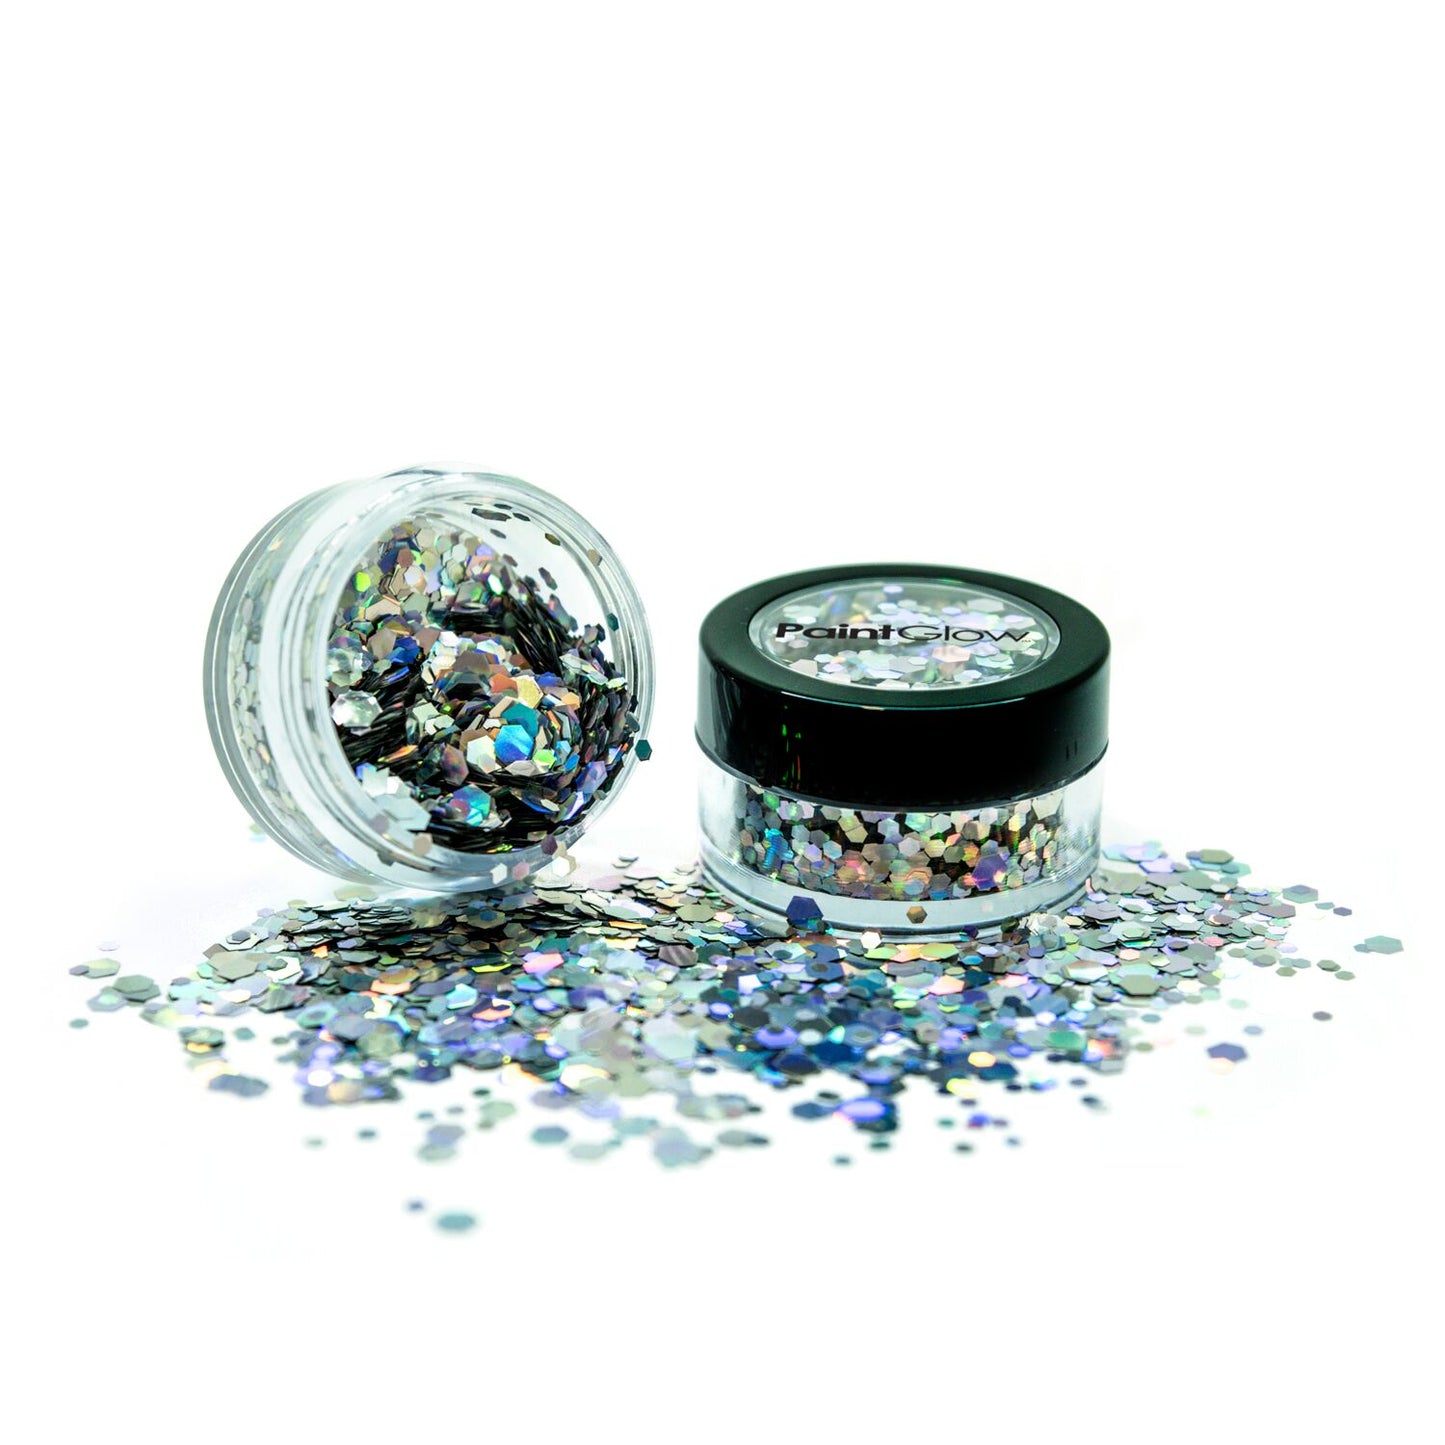 PaintGlow Holographic Chunky Glitter  – Vegan Cosmetic Glitter for Face, Body, Nails, Hair and Lip